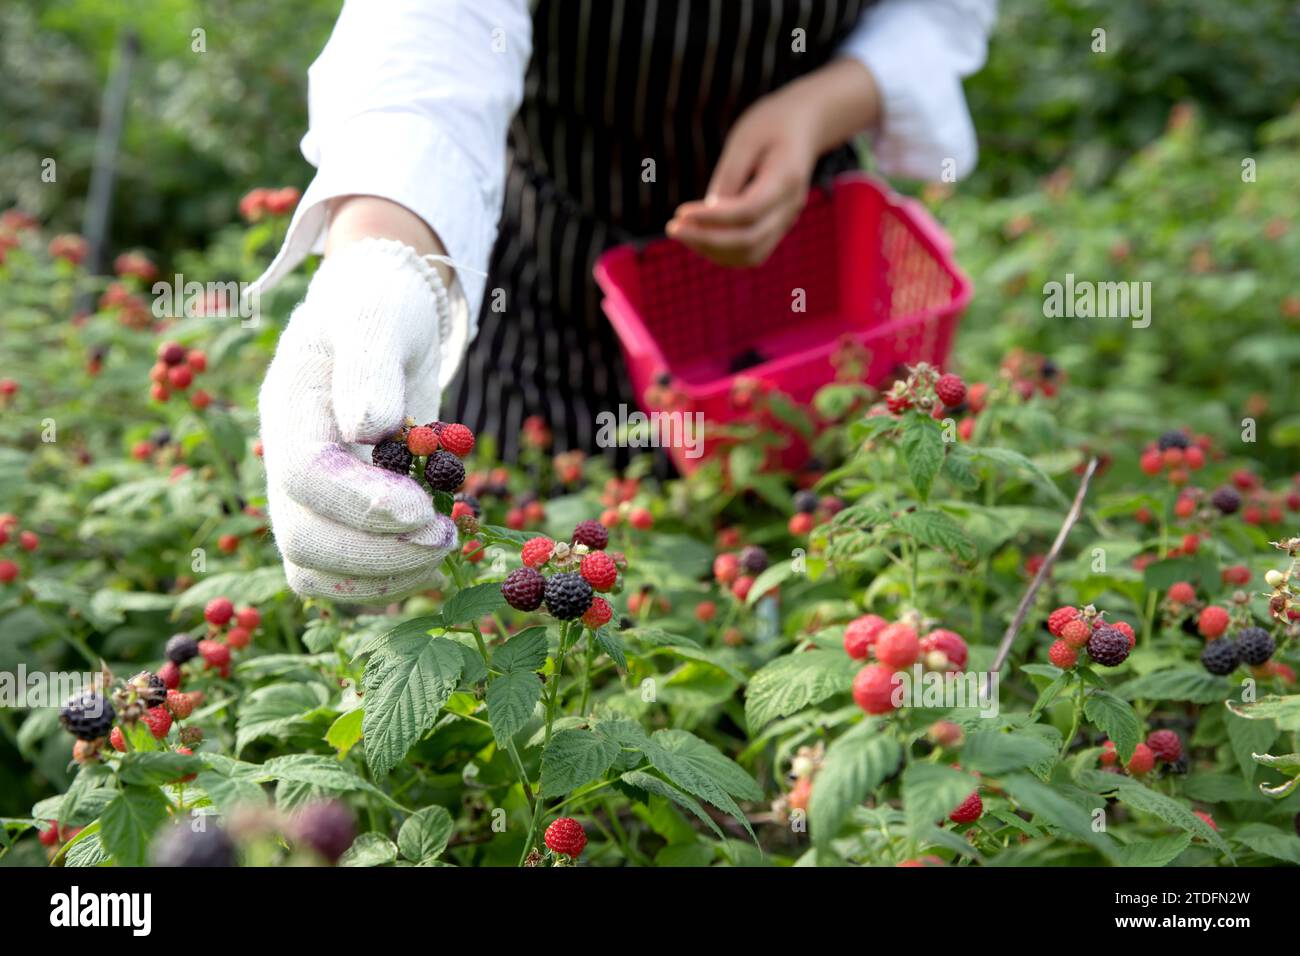 Close up of hands harvesting berries in black berry field Stock Photo